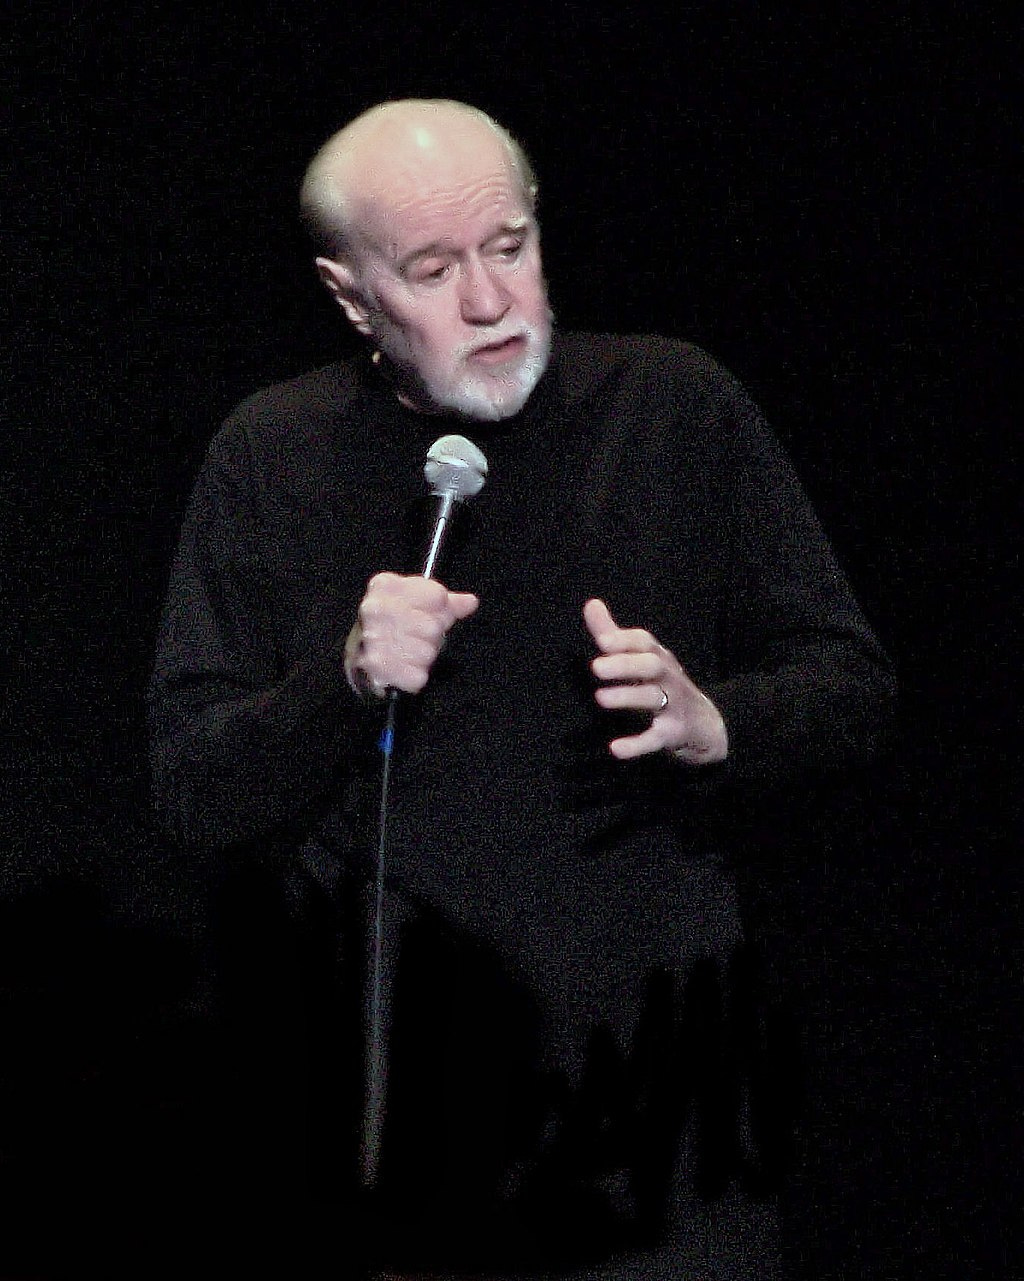 George Carlin performing stand up comedy in April 2008.